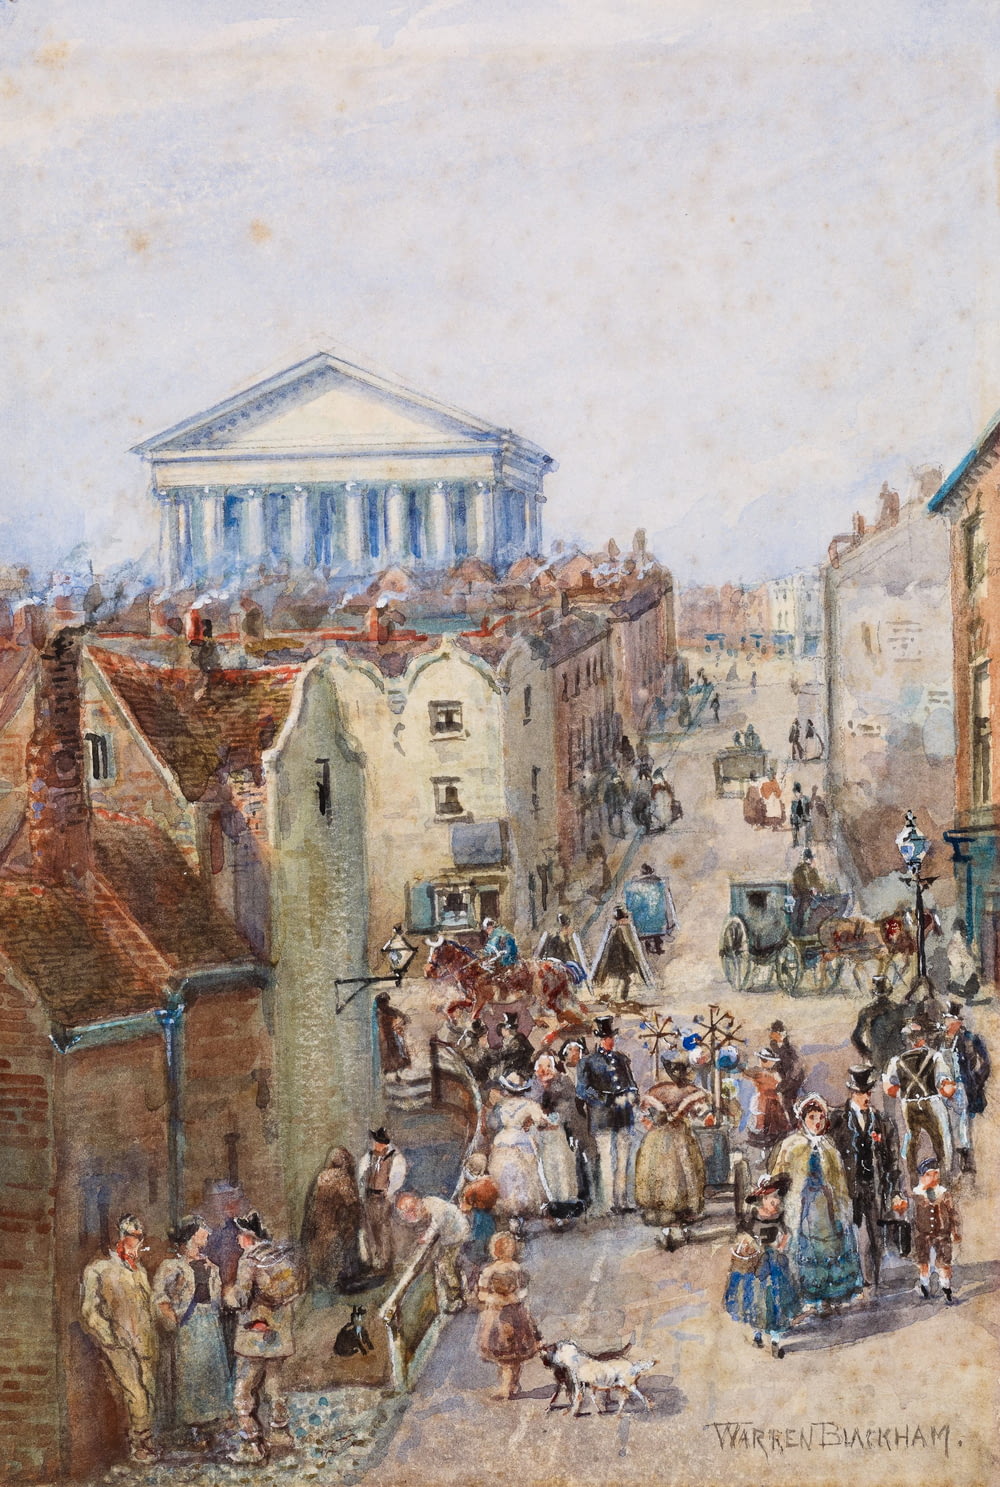 a painting of a street scene with people and horses